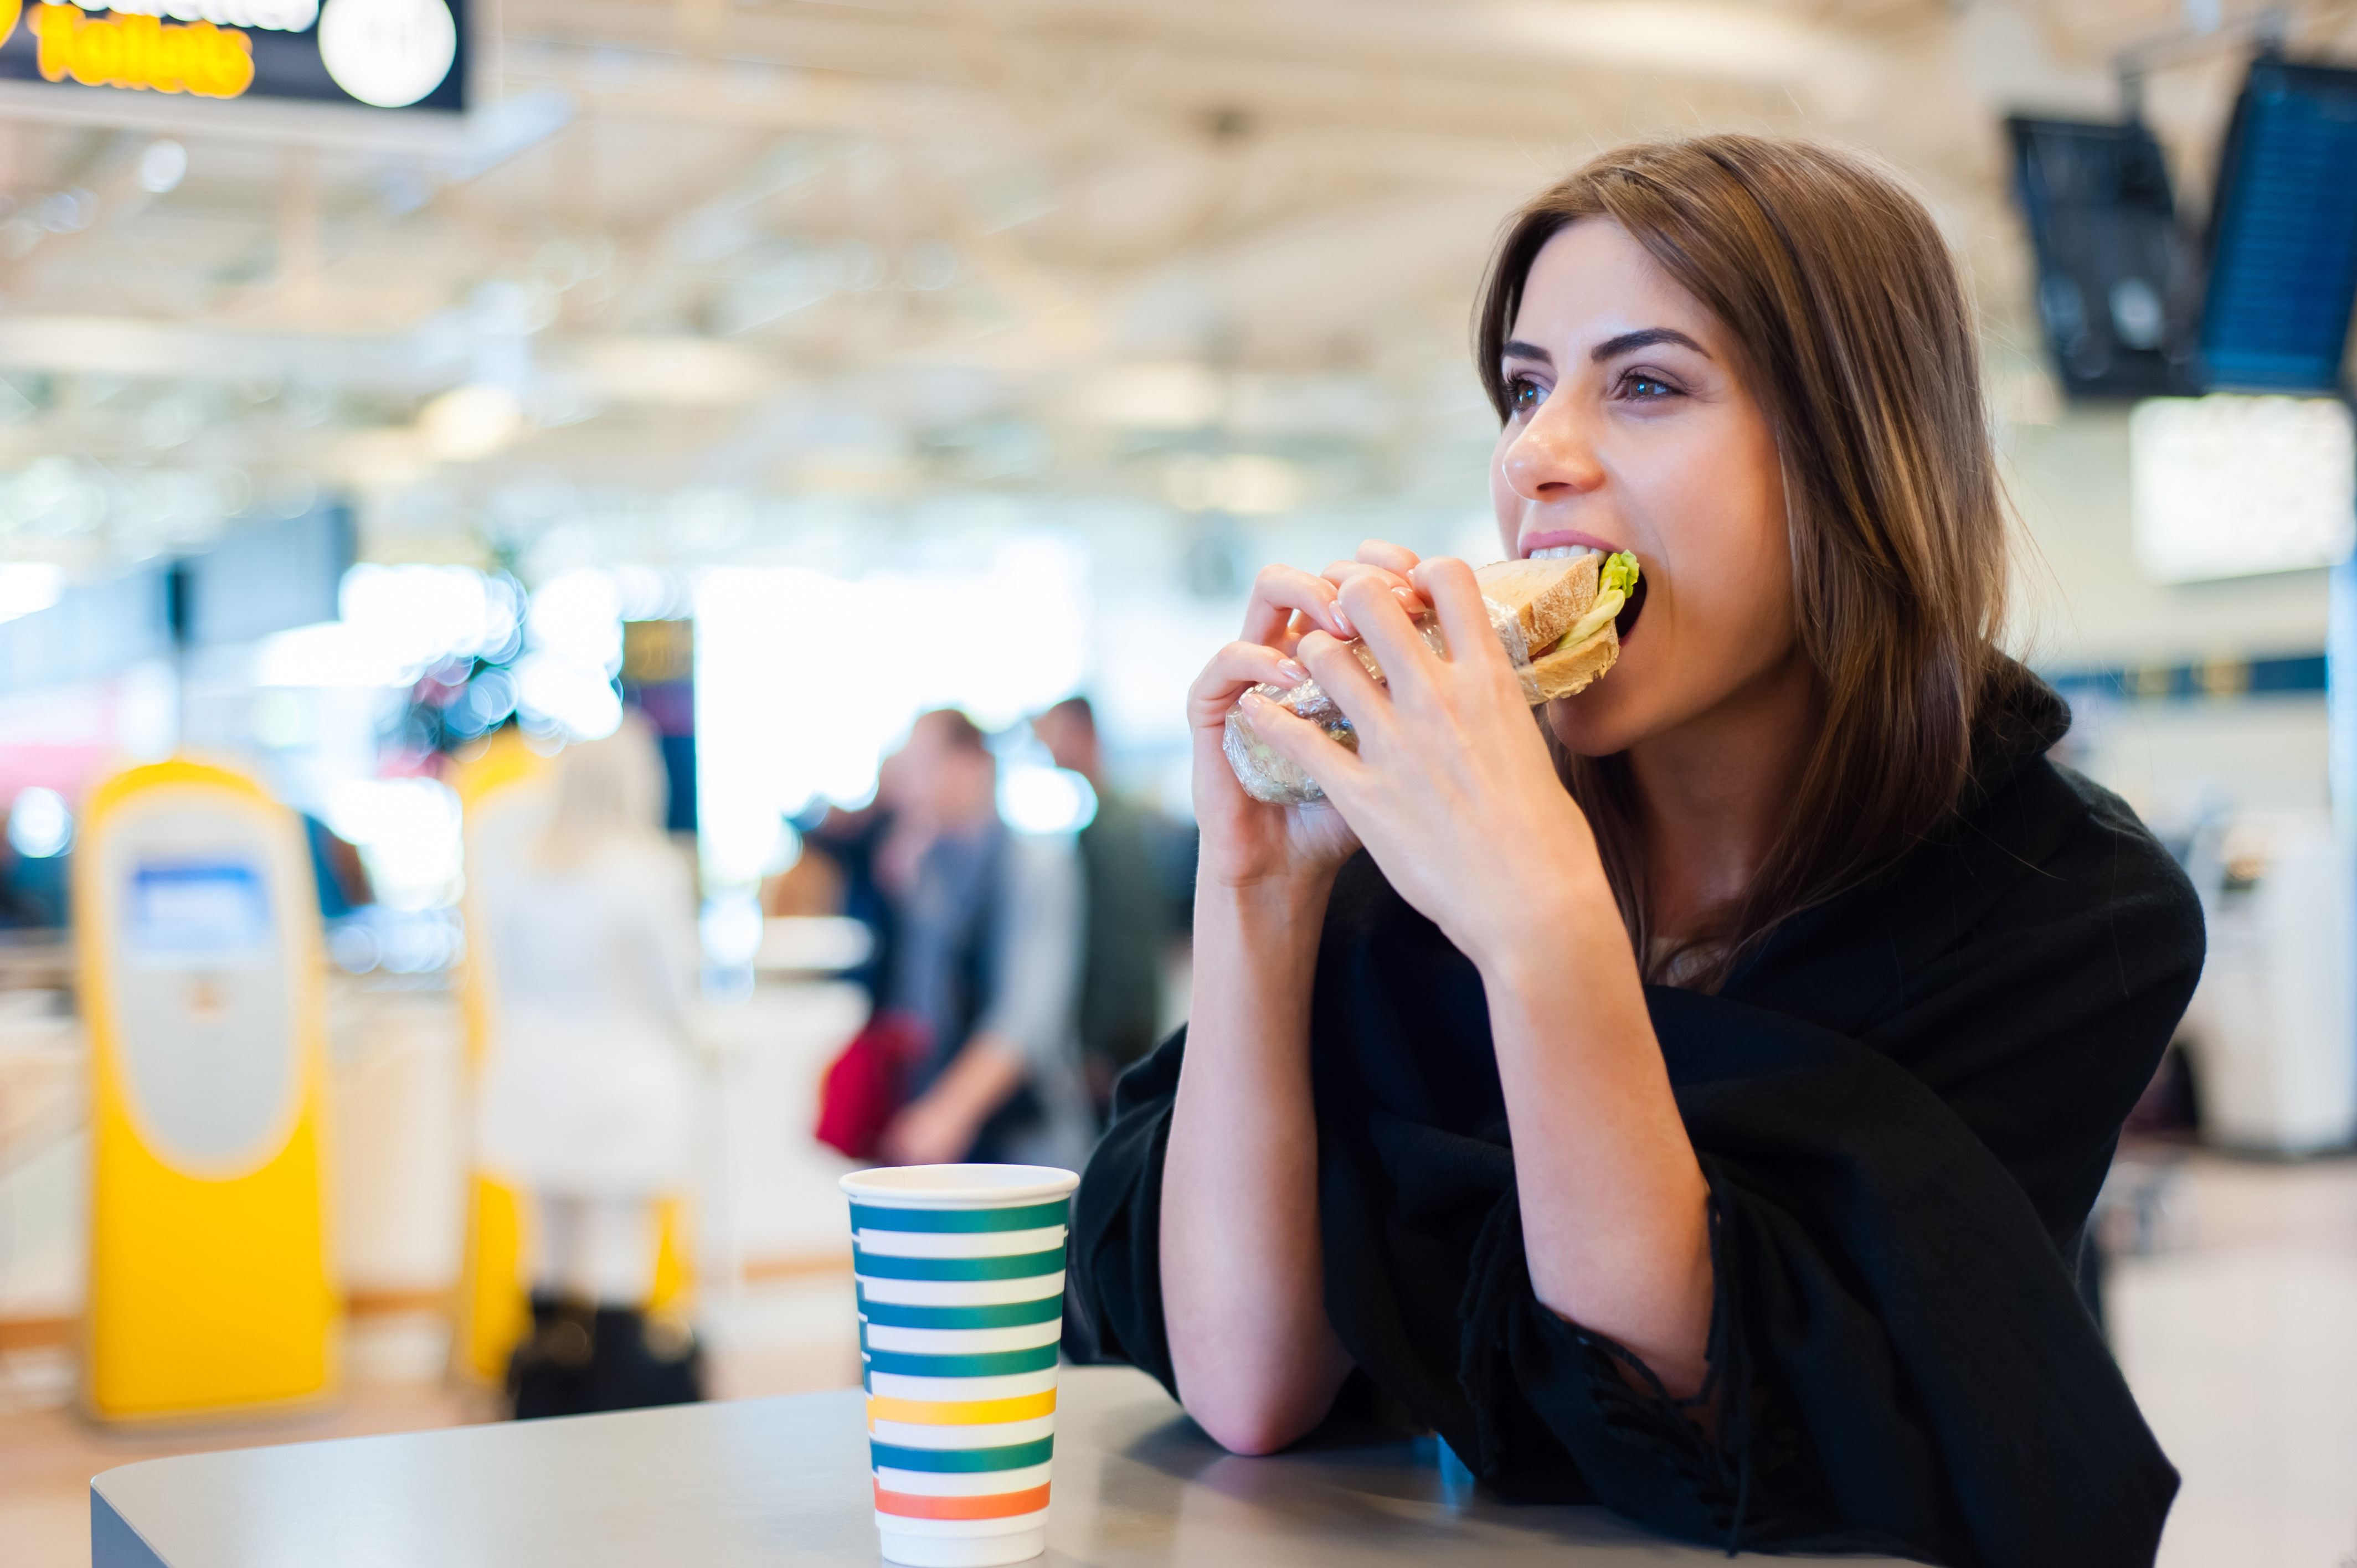 A woman in a black shirt eats a sandwich in an airport restaurant; Best airports for local food